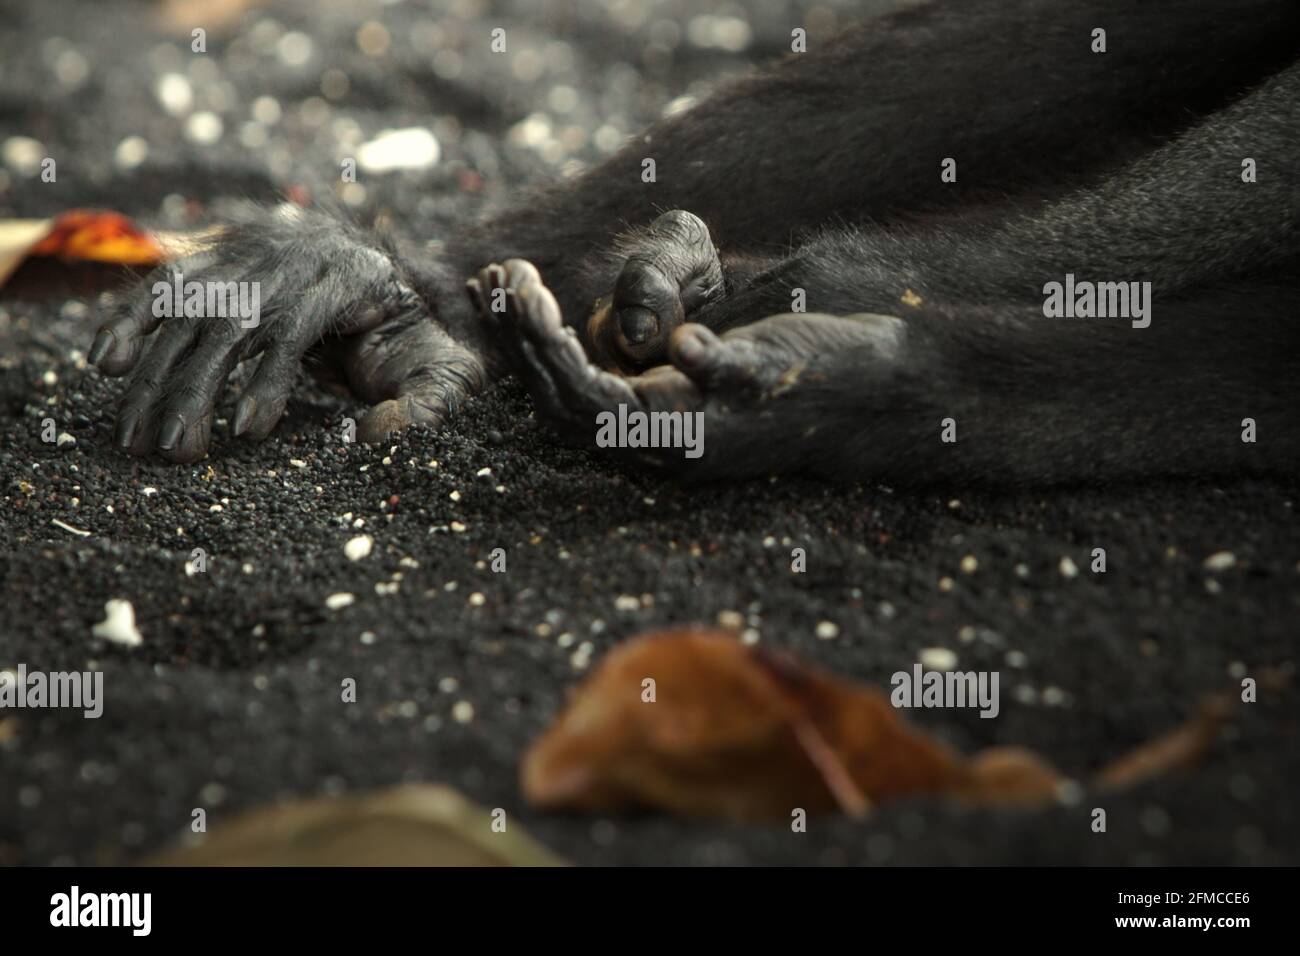 Hands and right foot of a Sulawesi black-crested macaque (Macaca nigra) that is taking a nap on the beach of Tangkoko, North Sulawesi, Indonesia. Stock Photo